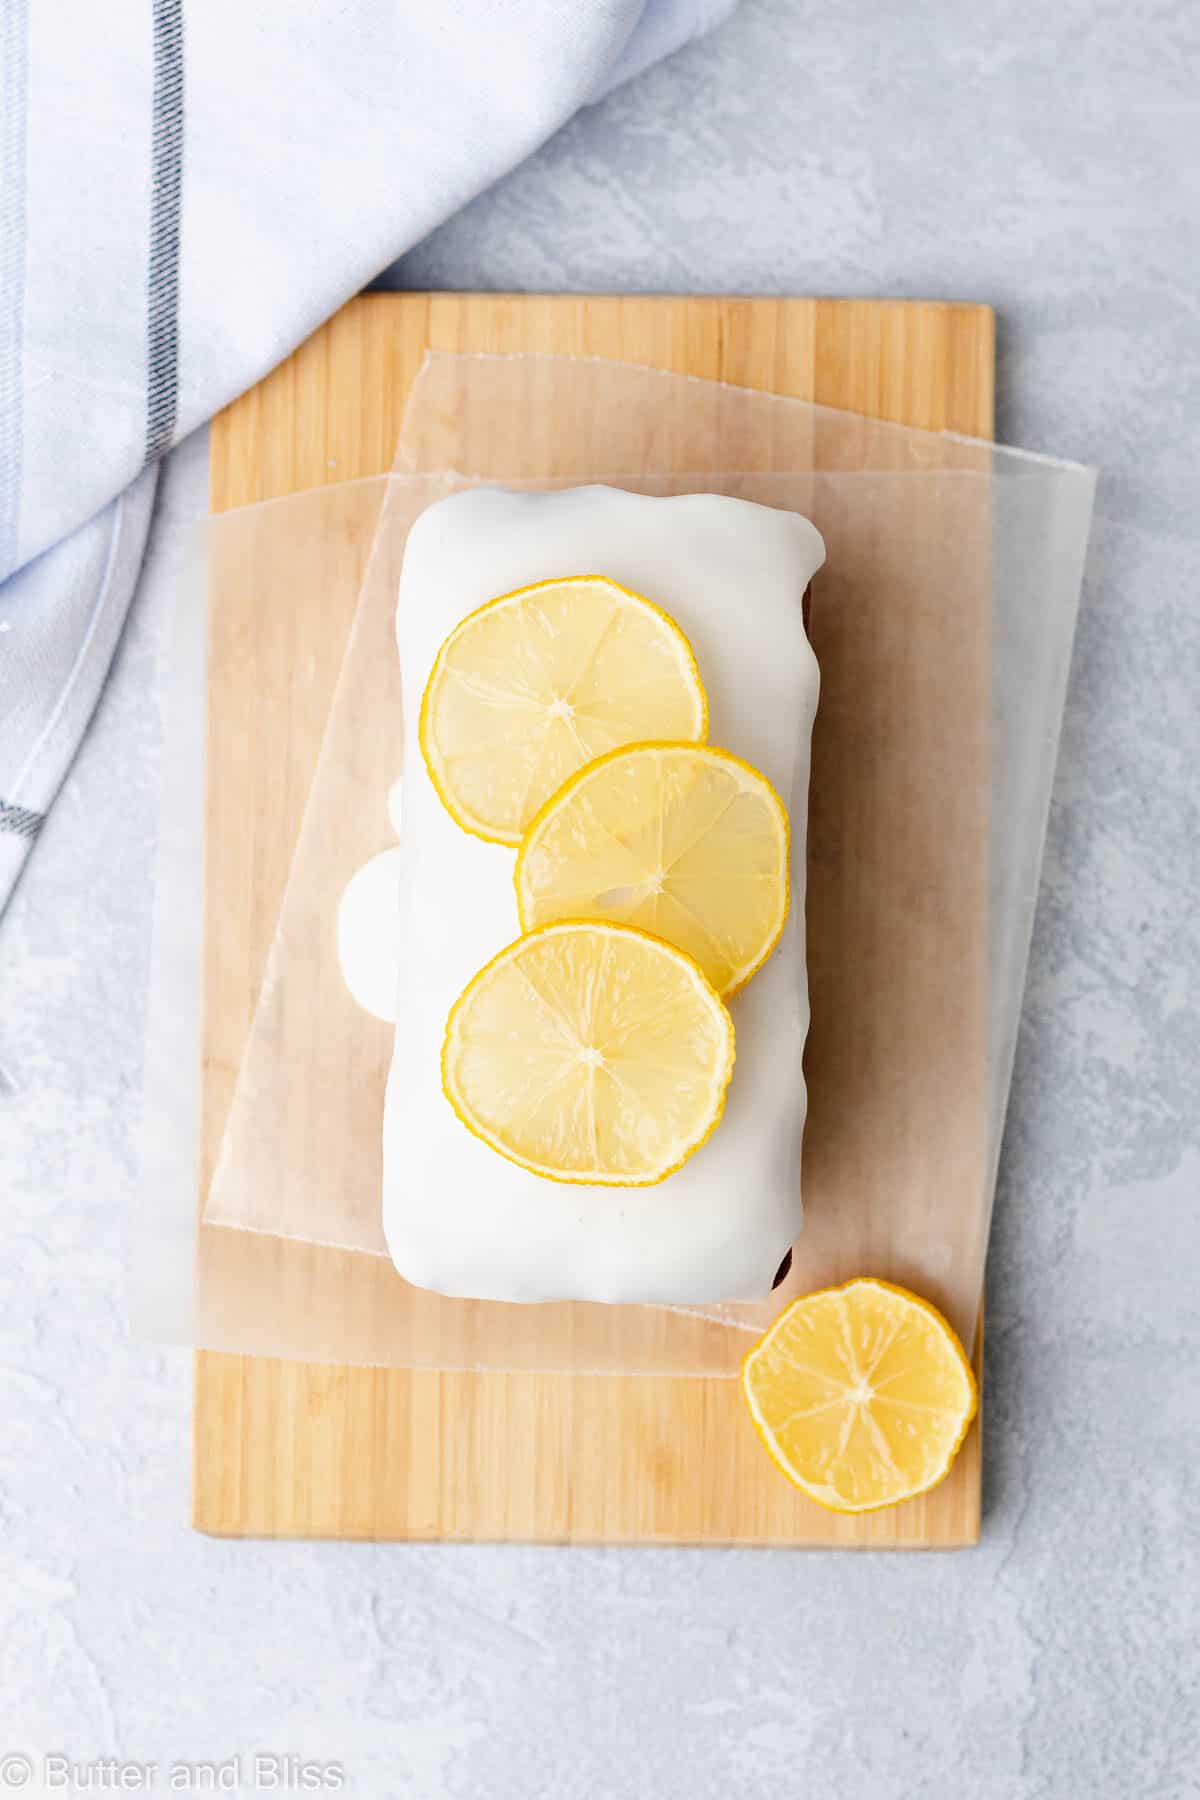 Gluten free mini lemon loaf with lemon slices and icing on a cutting board